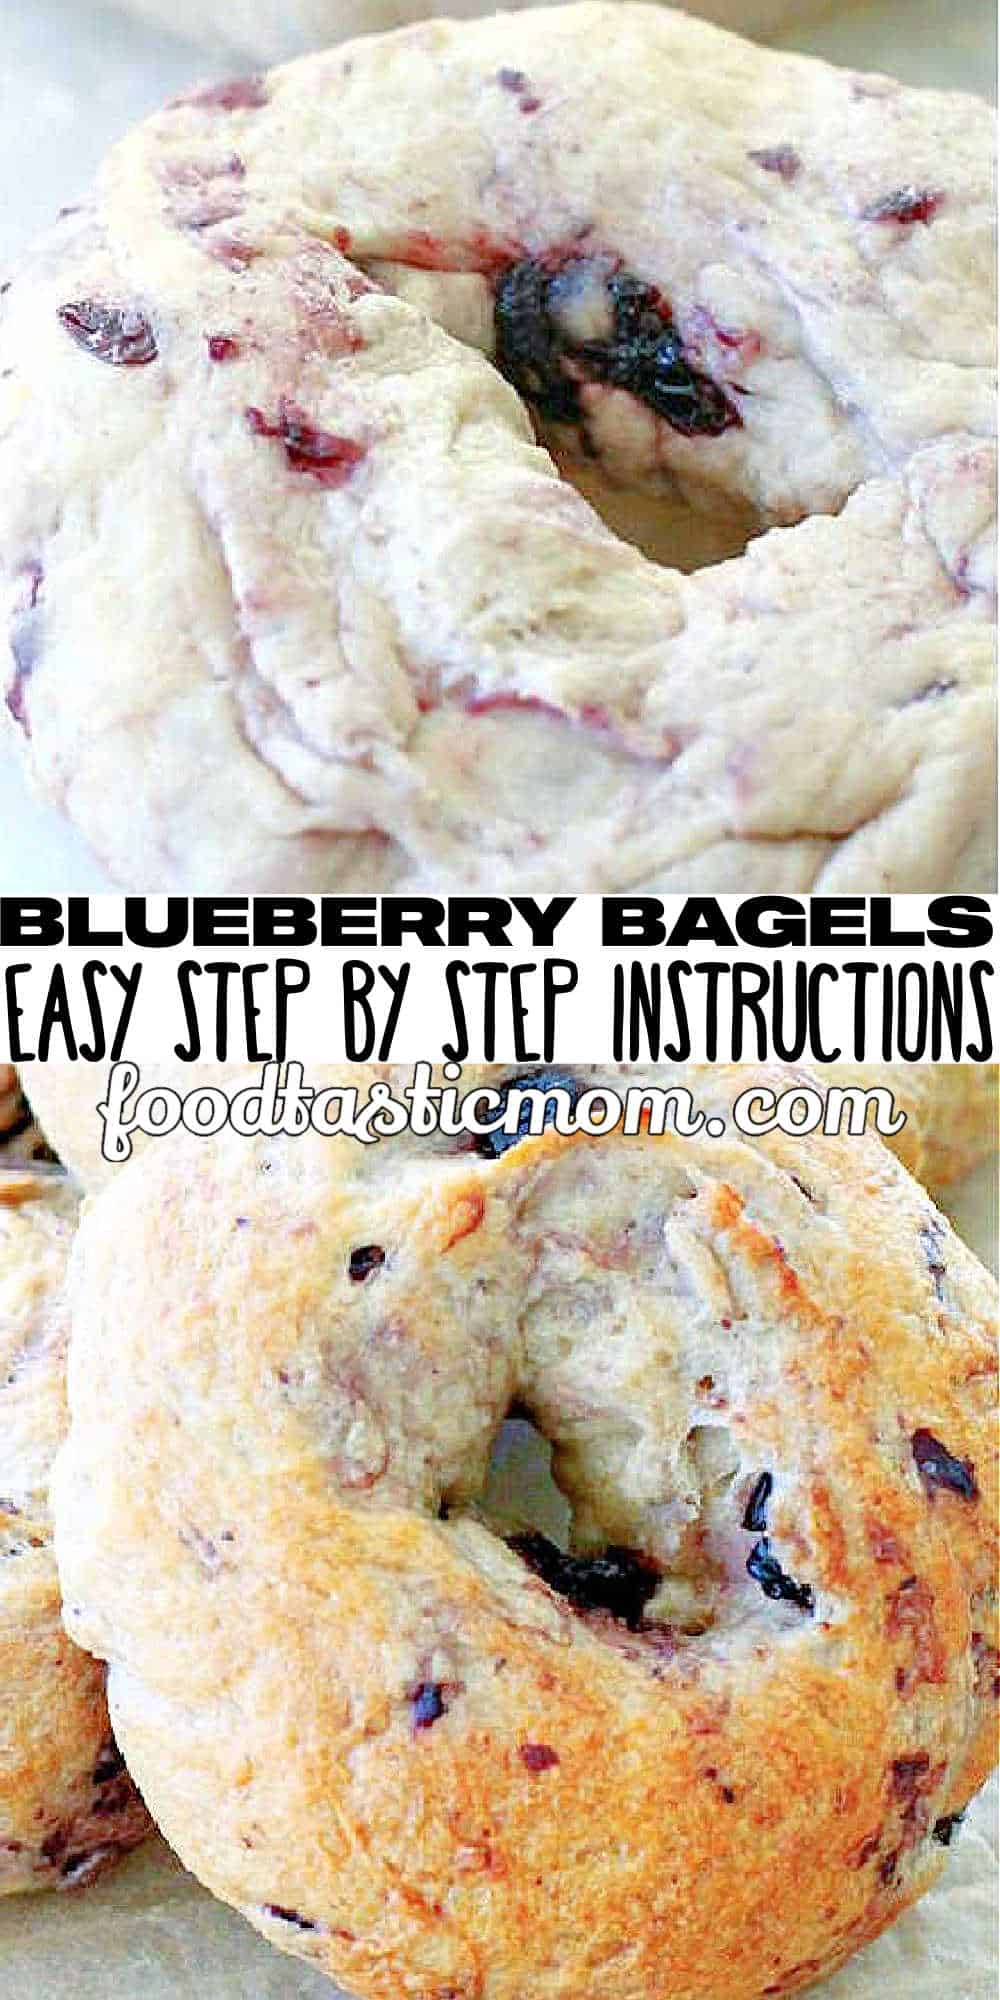 These Blueberry Bagels are a terrific weekend baking project. Bread and oat flours plus dried blueberries combine for dough that's easy to handle. via @foodtasticmom